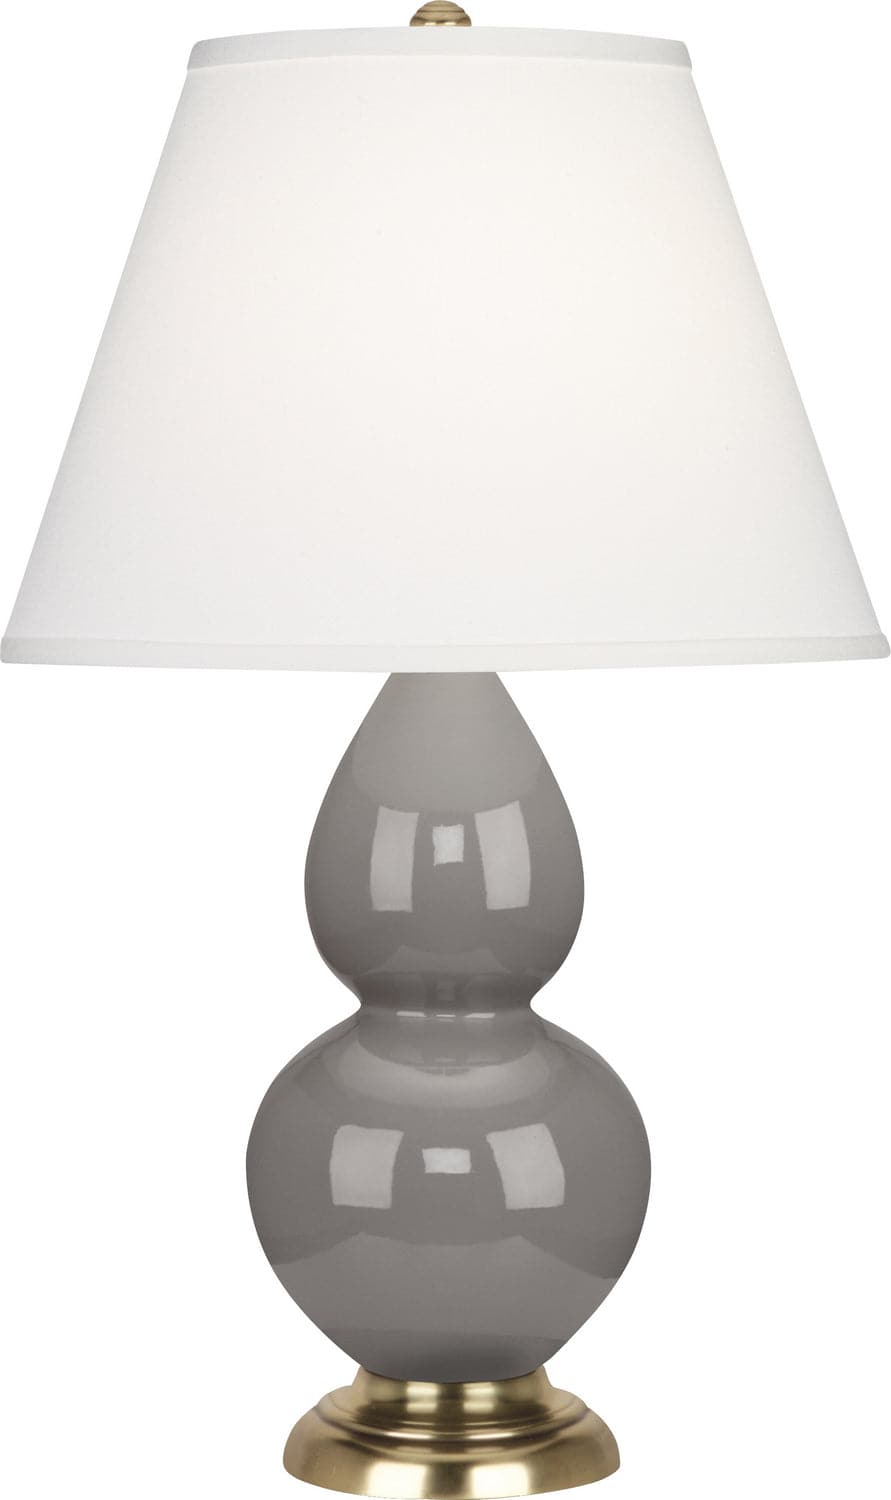 Robert Abbey - 1768X - One Light Accent Lamp - Small Double Gourd - Smoky Taupe Glazed